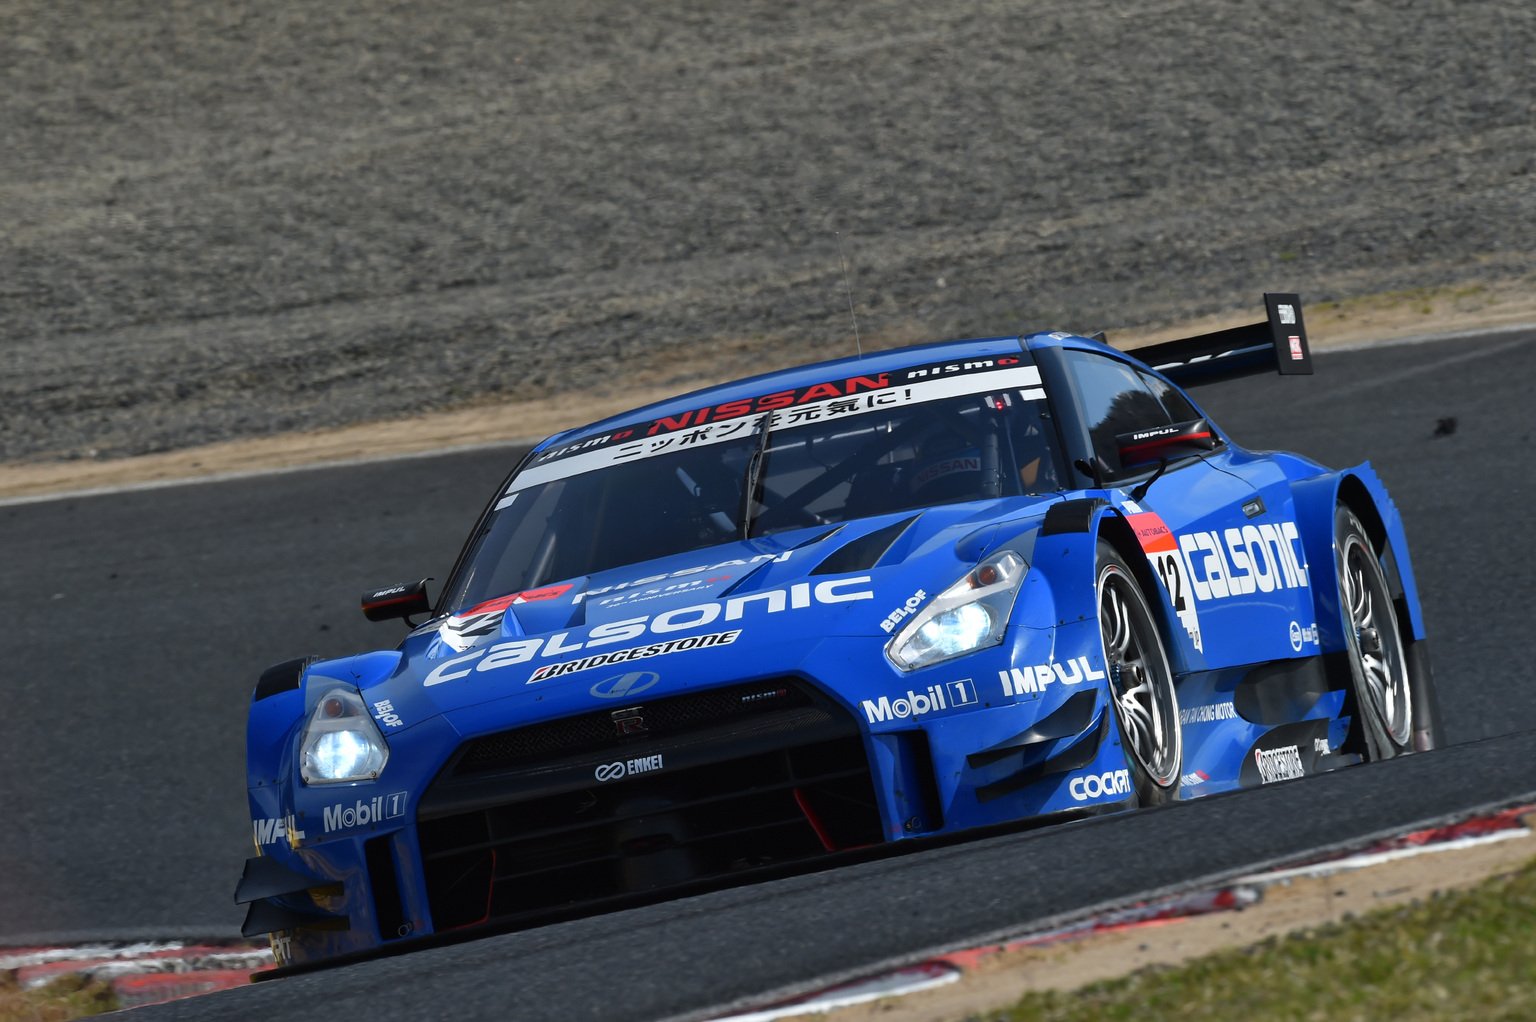 14 Supergt Season Opener From Okayama Japan Team Impul Calsonic 14 Nissan Gt R Nismo Gt500 Wallpapers Hd Desktop And Mobile Backgrounds